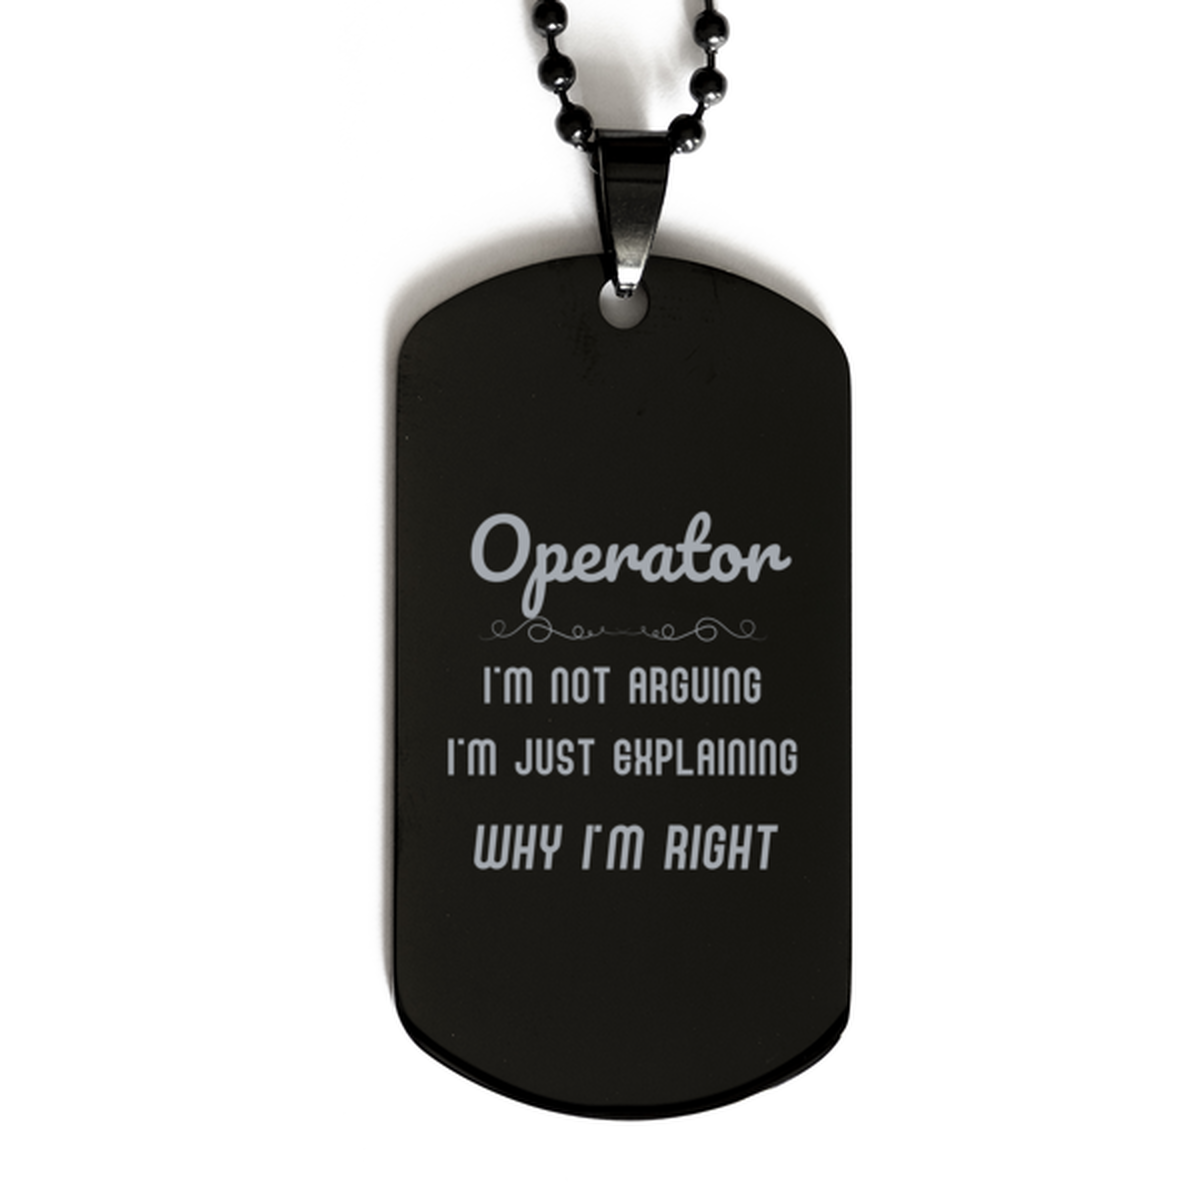 Operator I'm not Arguing. I'm Just Explaining Why I'm RIGHT Black Dog Tag, Funny Saying Quote Operator Gifts For Operator Graduation Birthday Christmas Gifts for Men Women Coworker